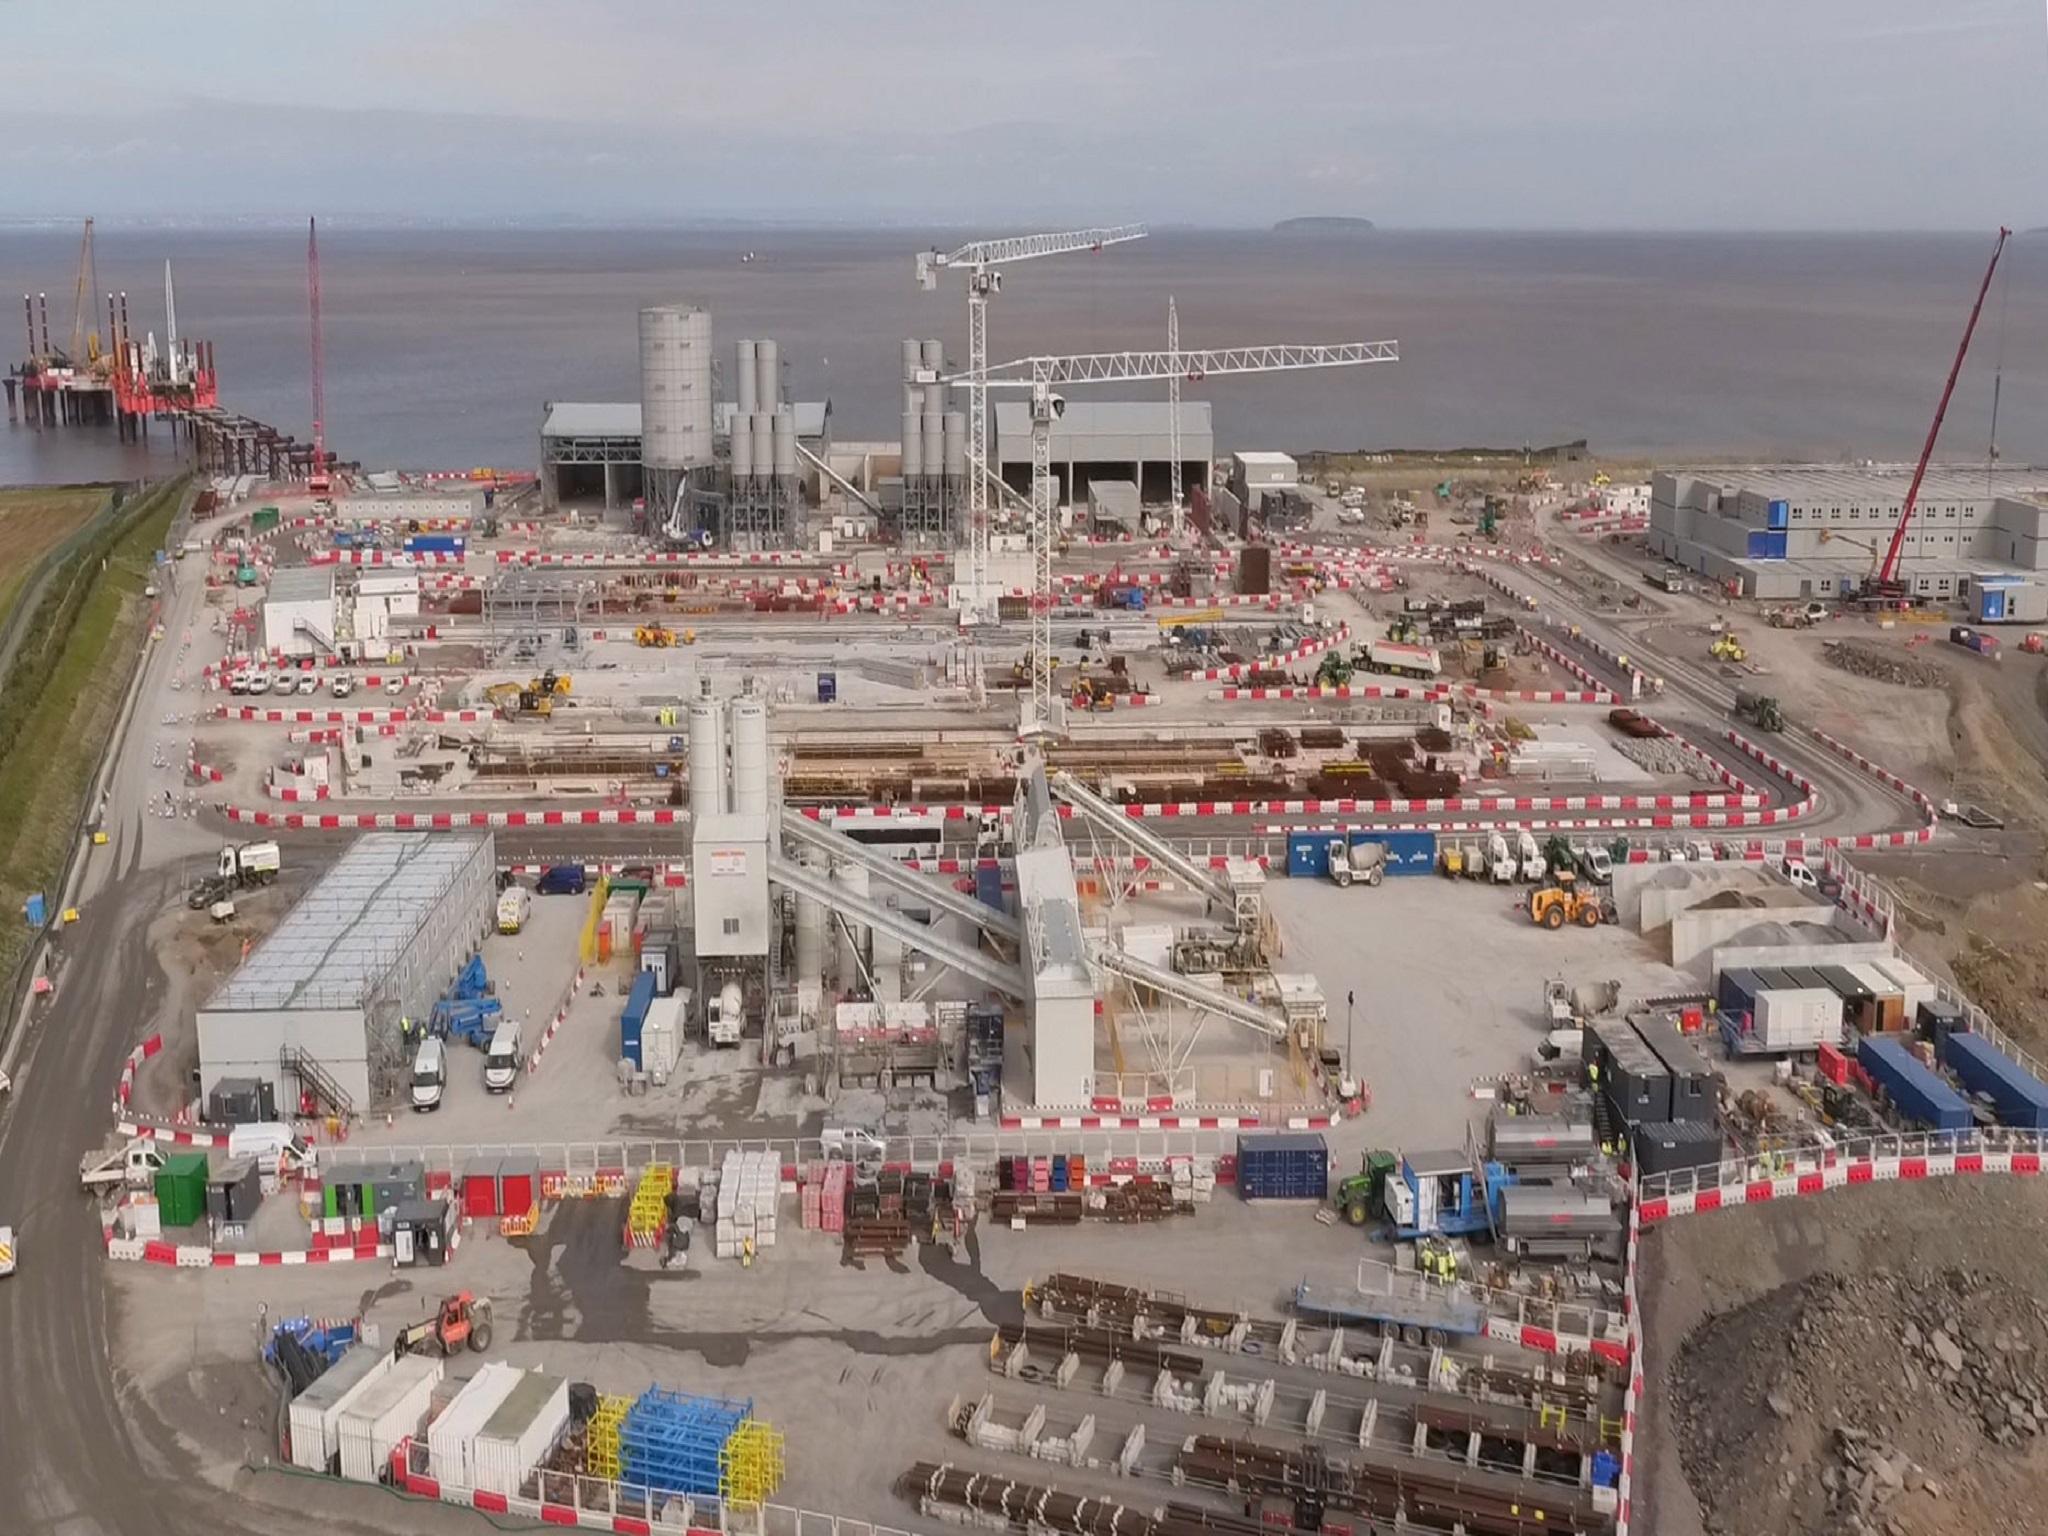 Civil engineering activity, a category that includes Hinkley Point in Somerset, fell for the third successive month